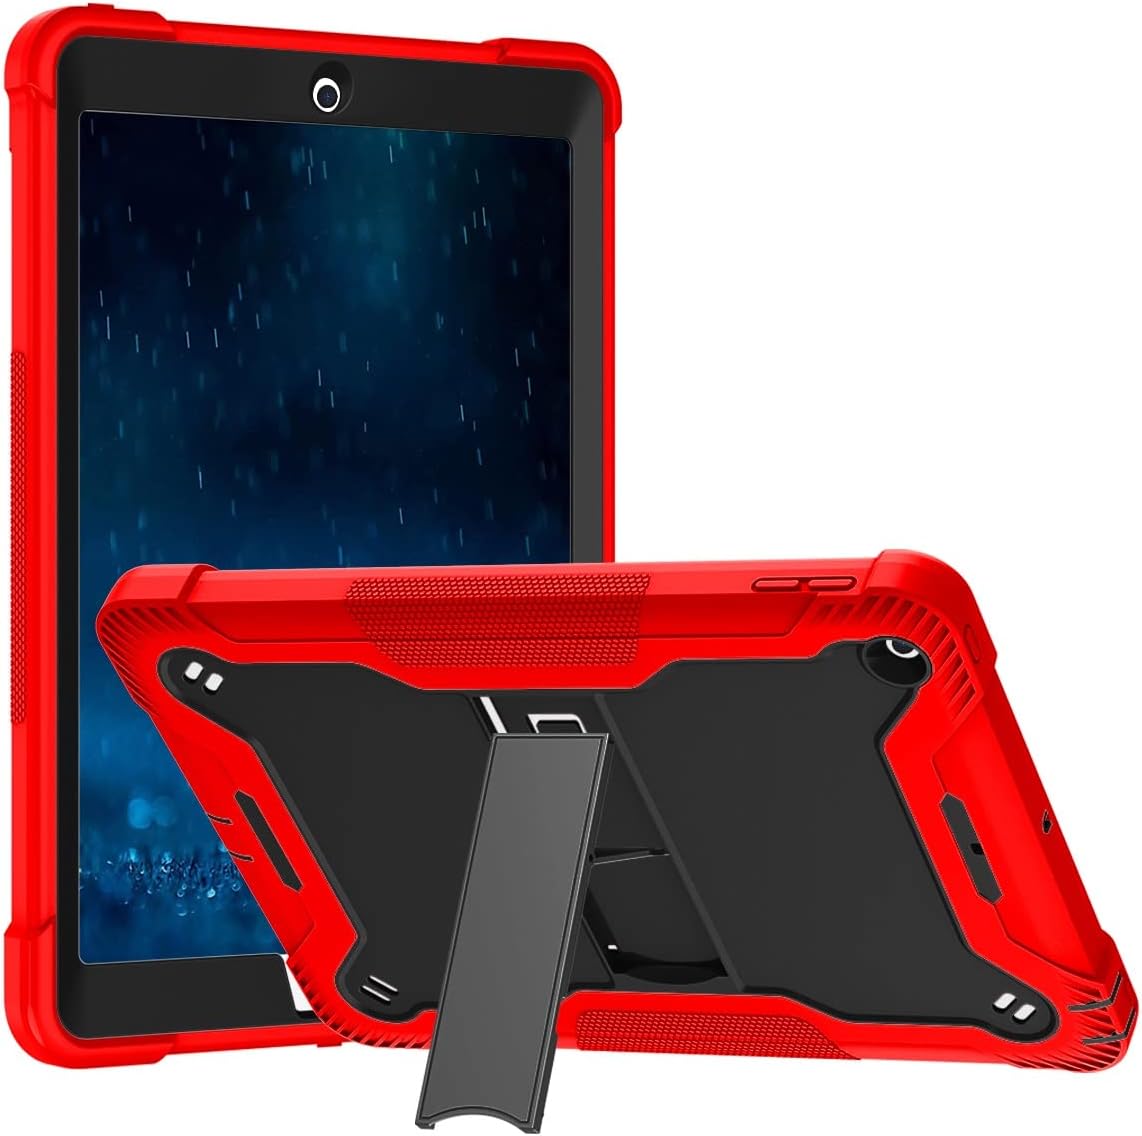 Apple iPad 7, 8, 9 (10.2 inch) Hot Pink Shockproof Rugged Case with Kickstand